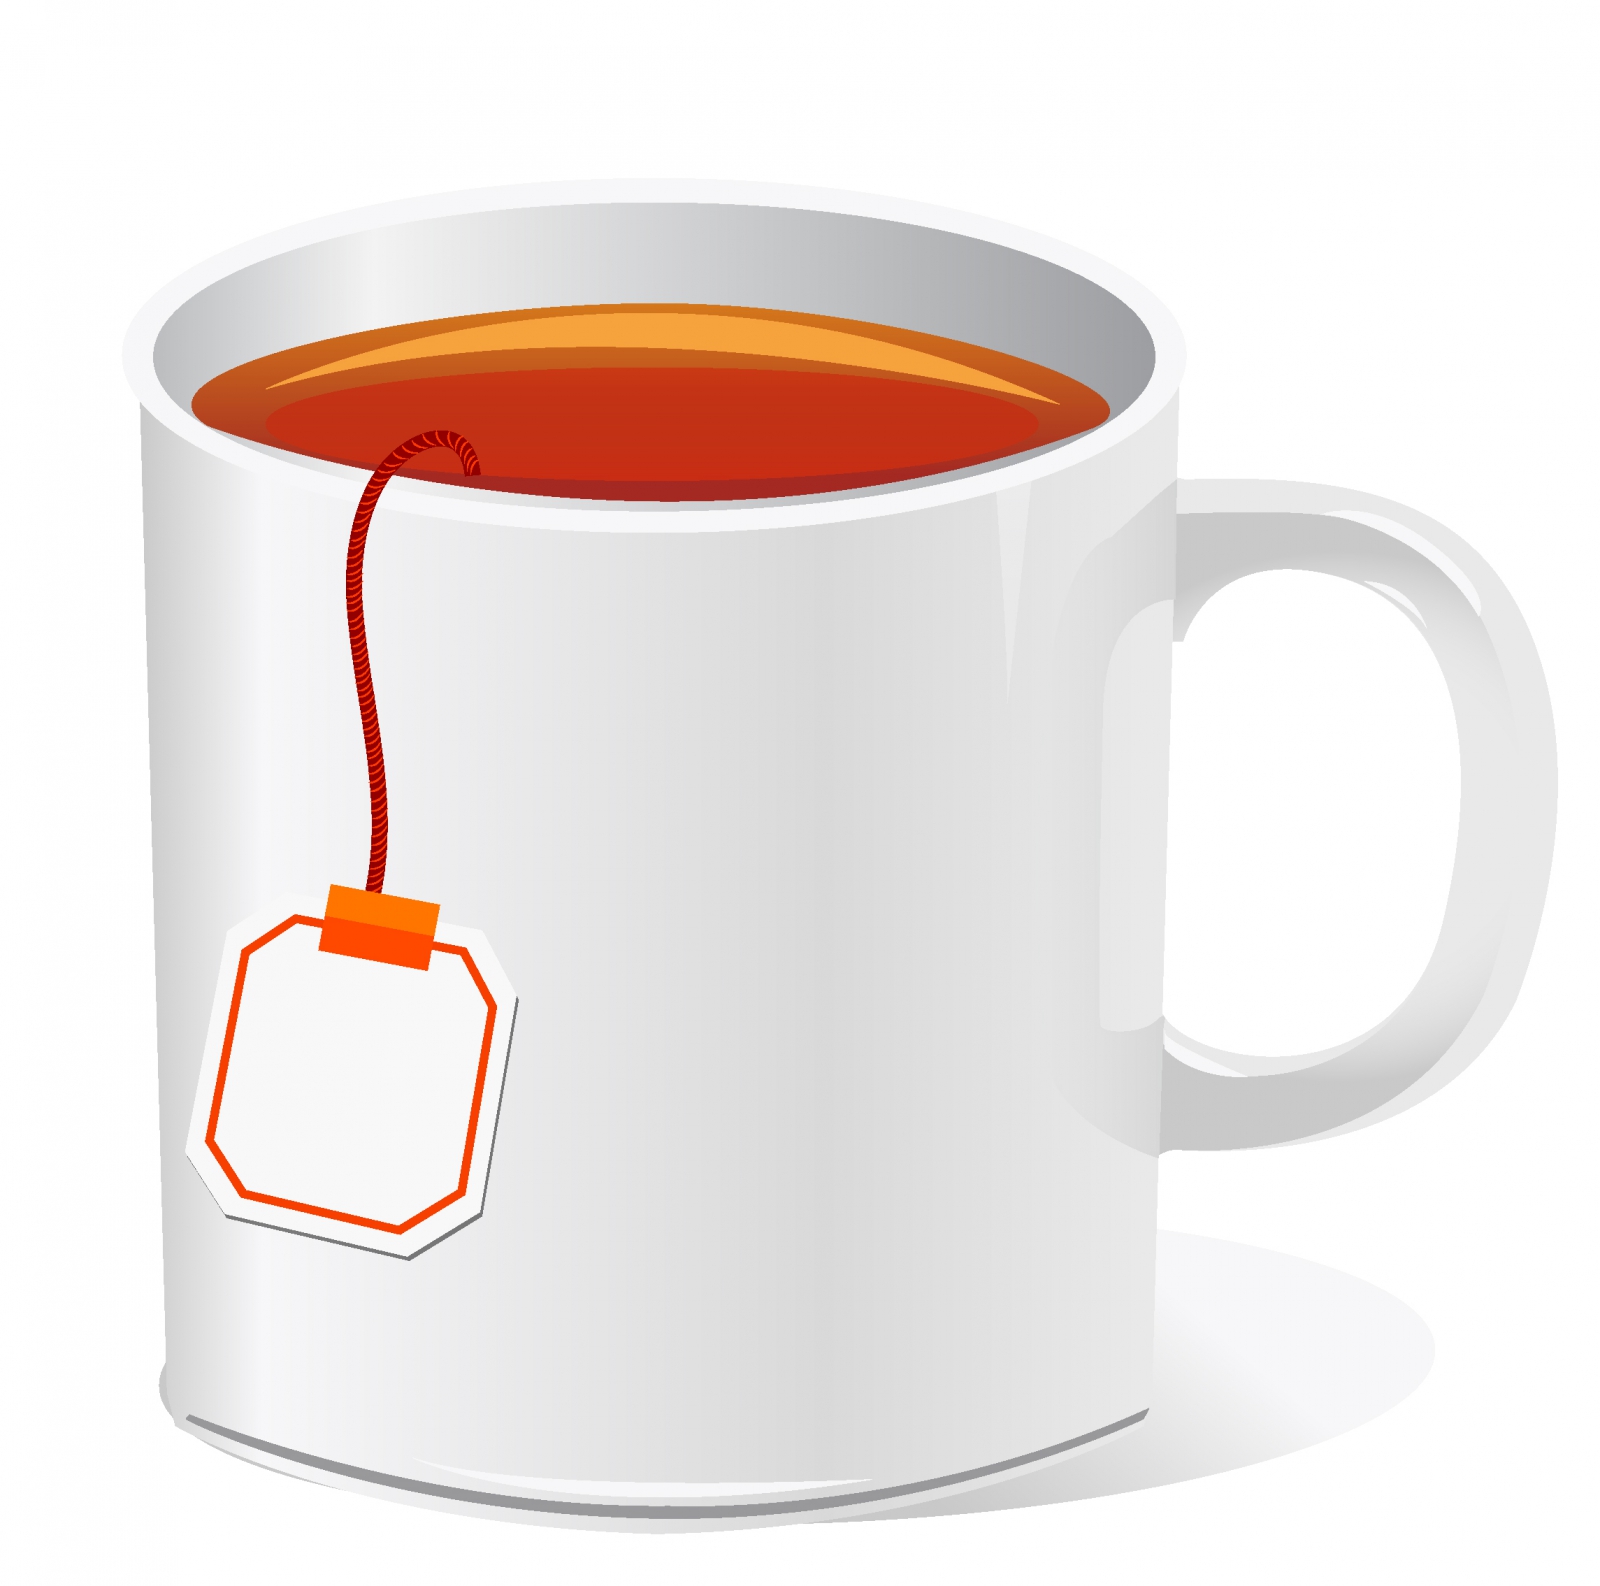 Tea cup with teabag Free Vector / 4Vector